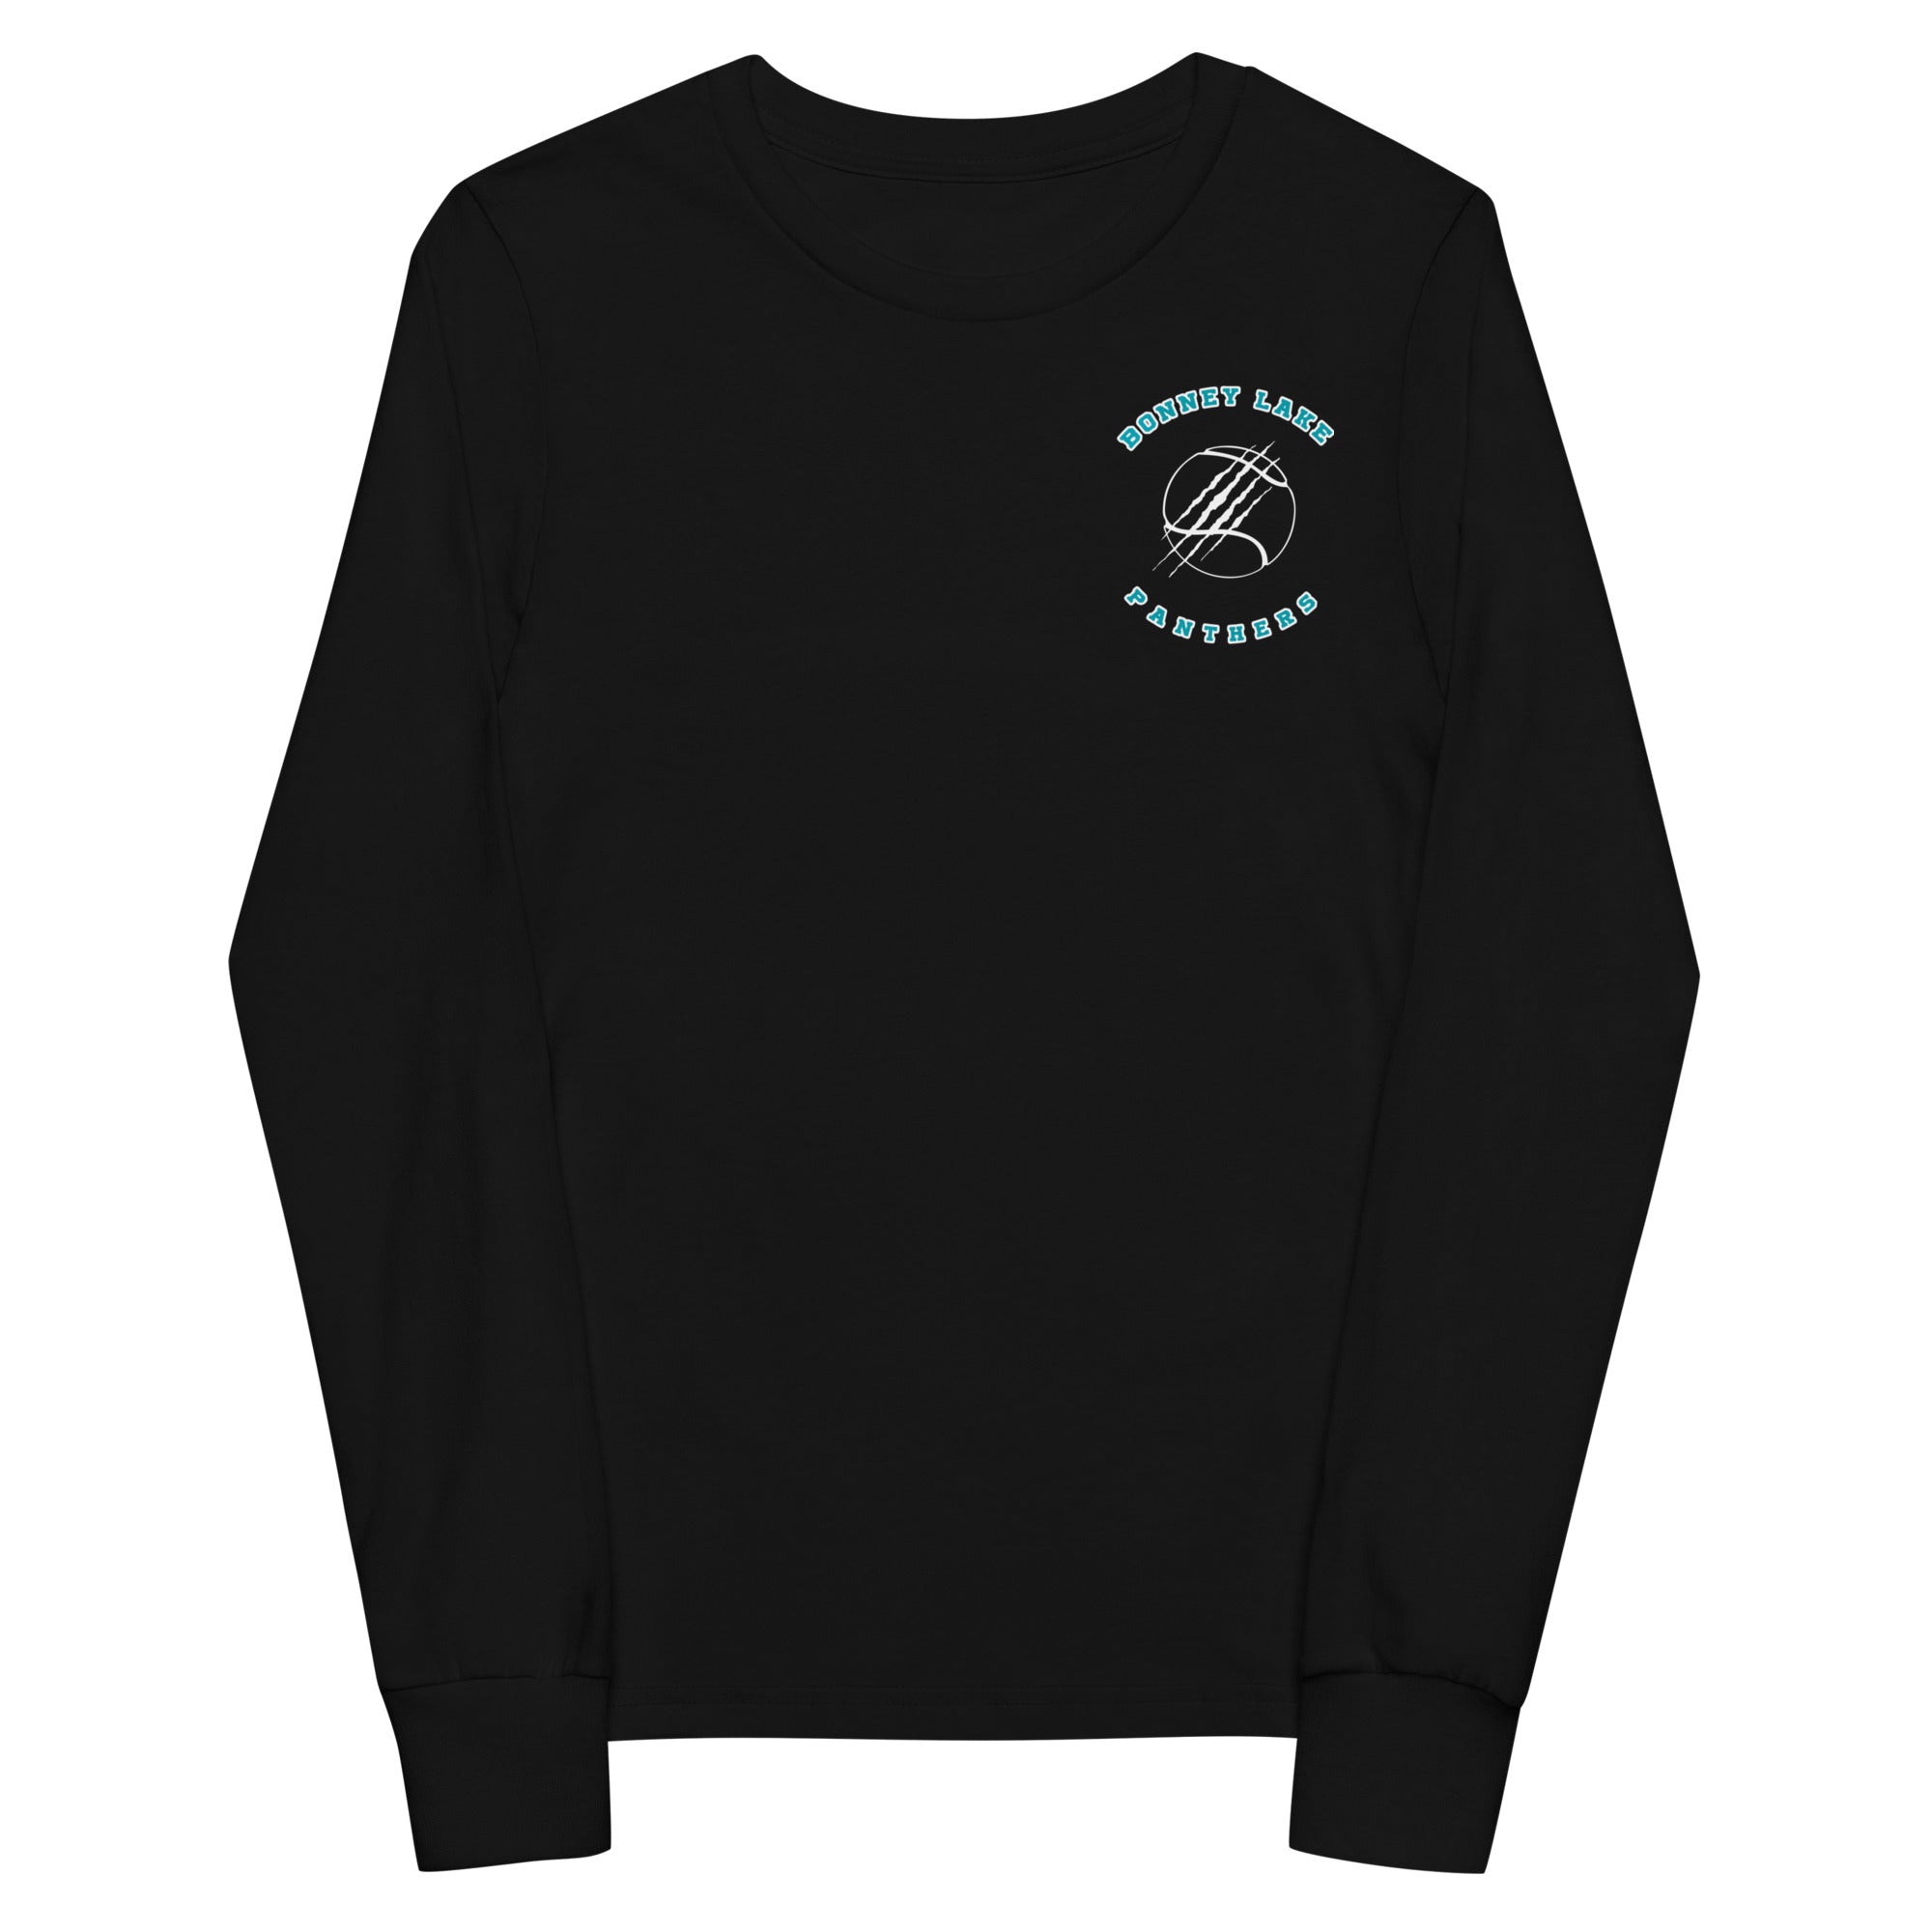 BLHT Youth long sleeve tee